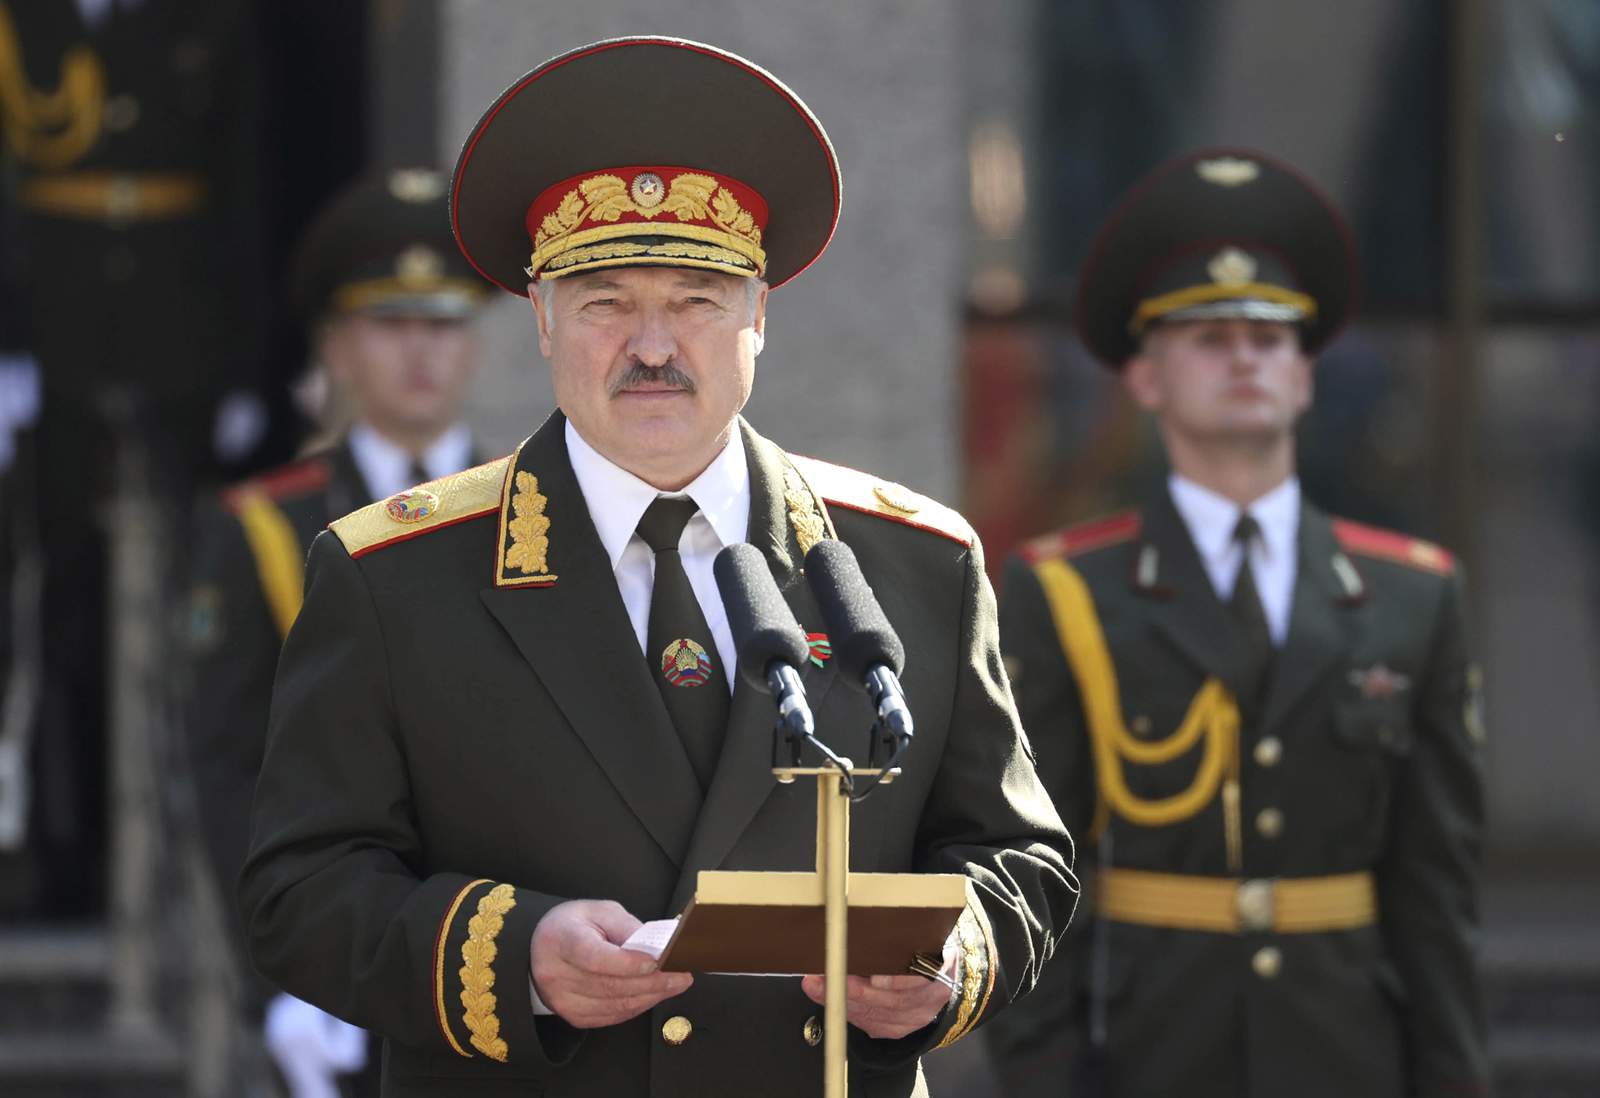 Belarus' leader claims he saved opposition challenger's life